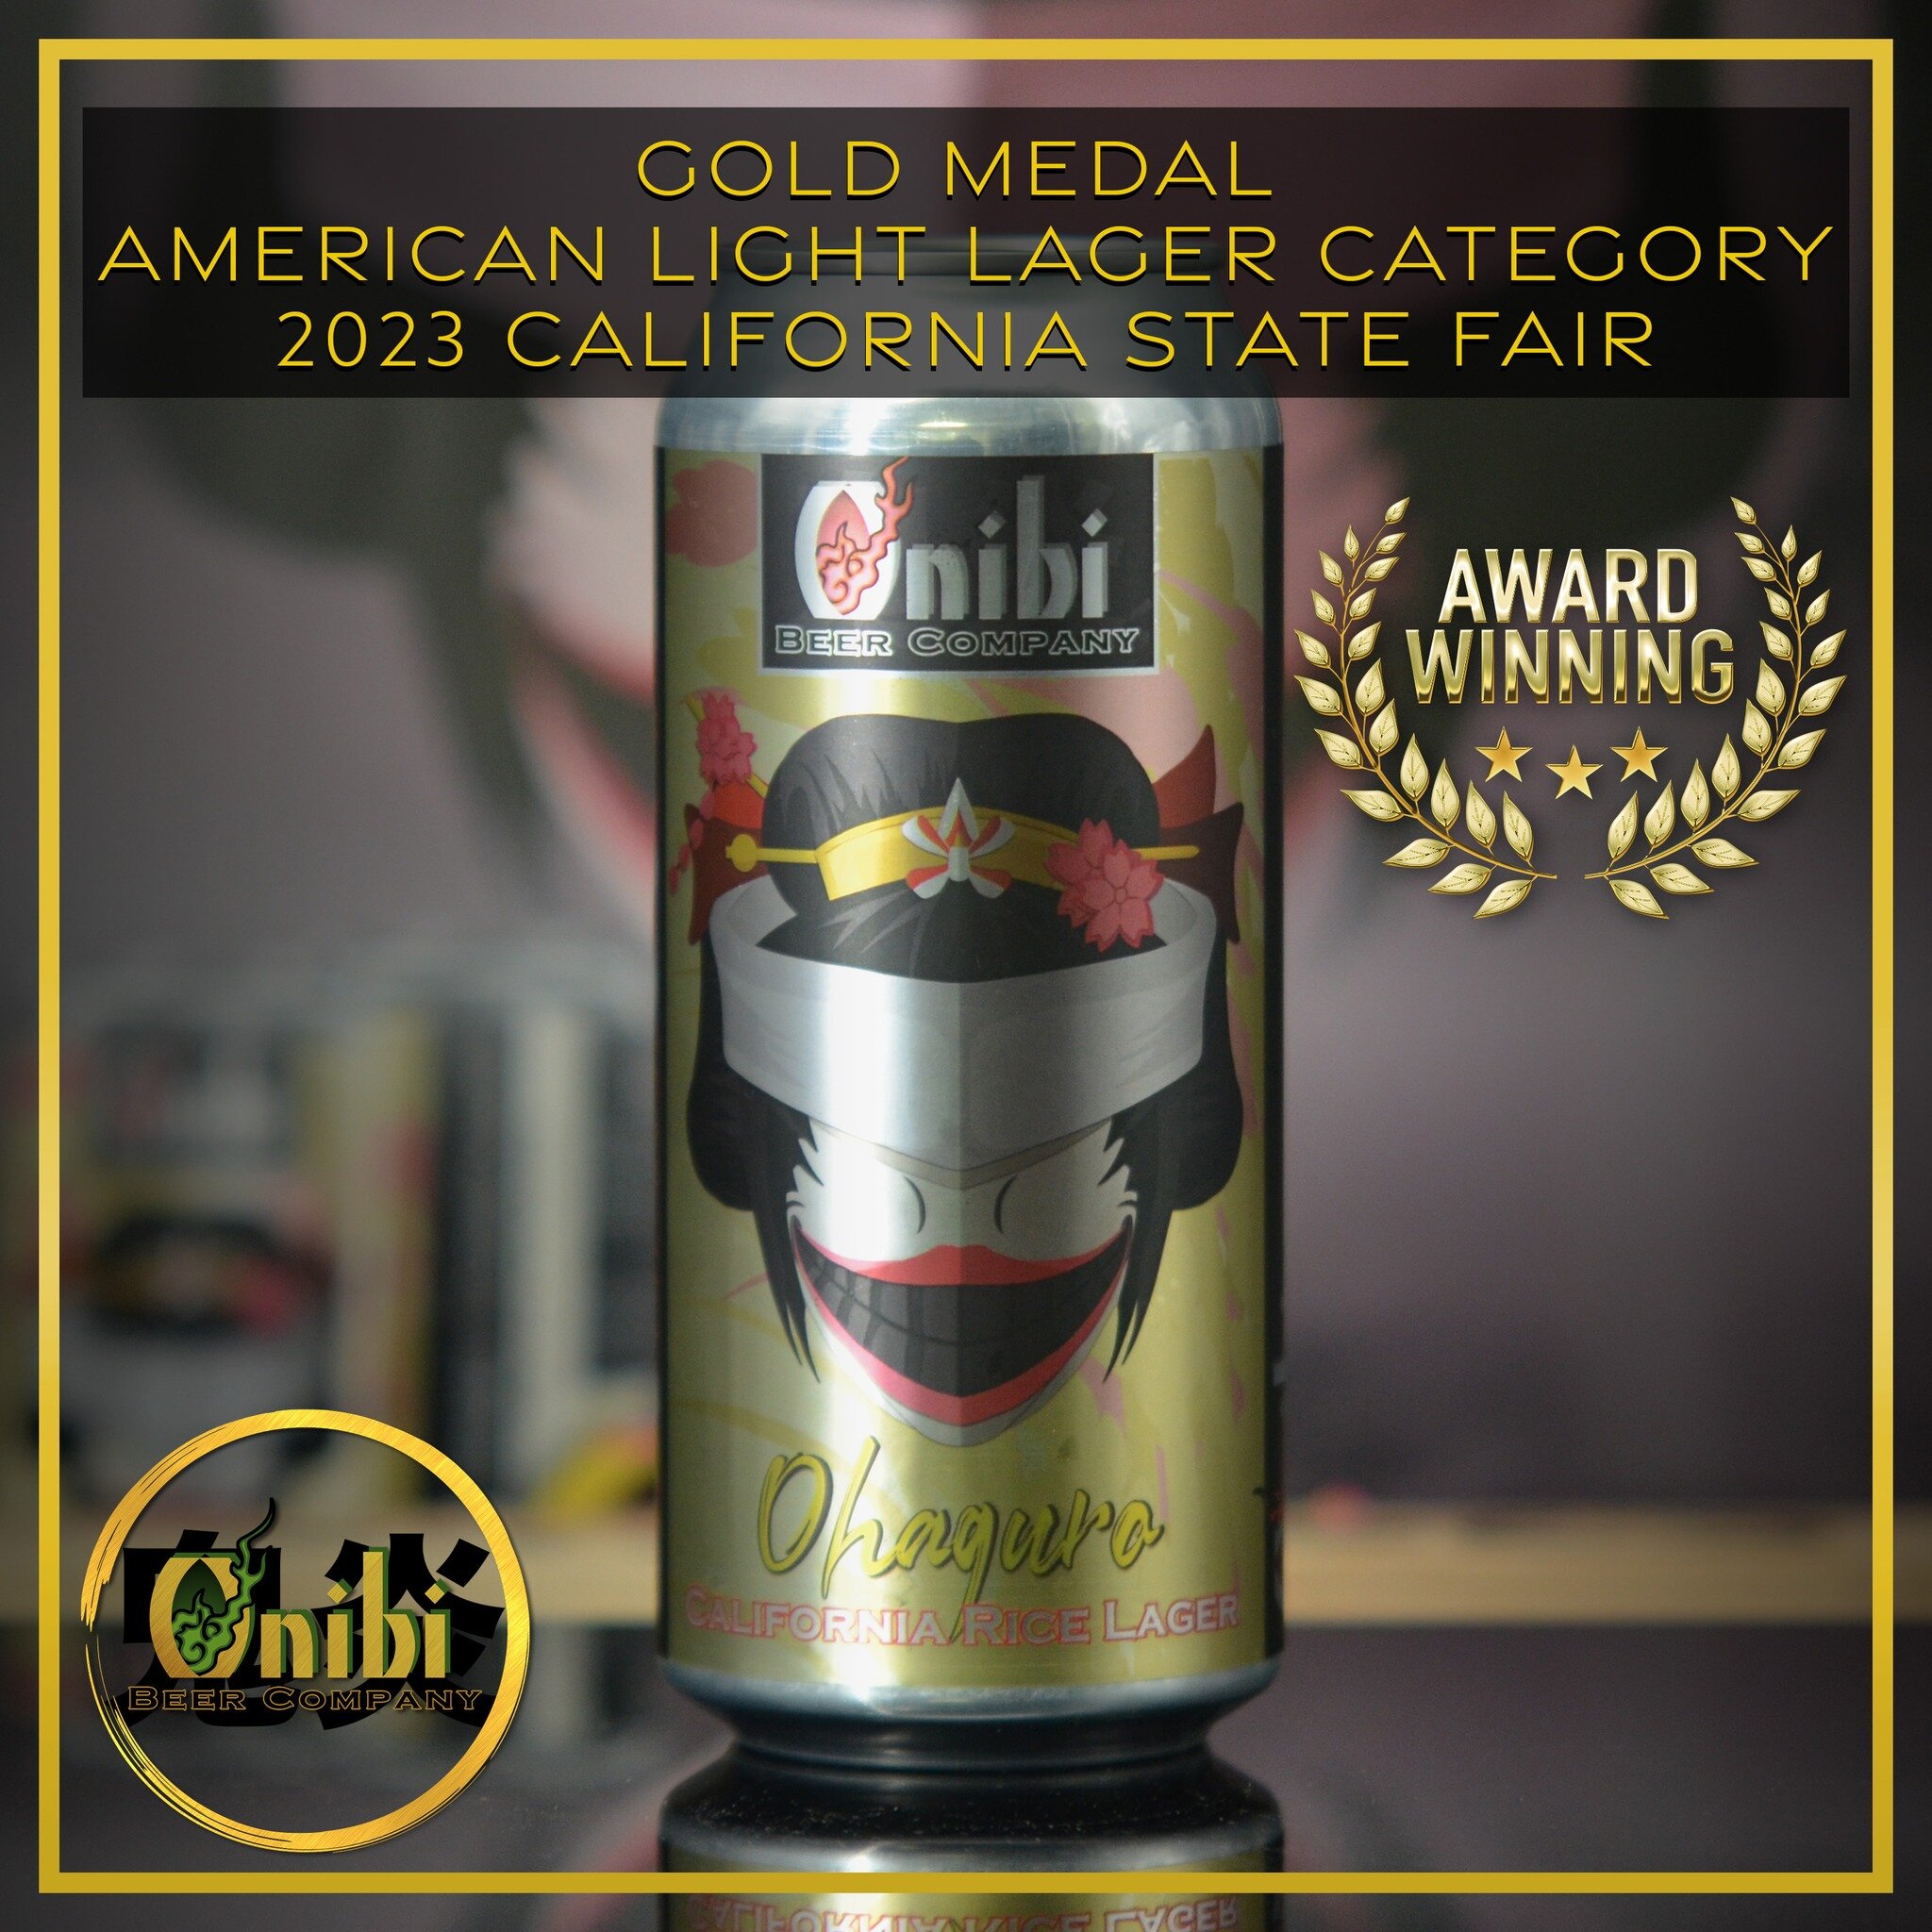 Our Ohaguro, California Rice Lager, took home a Gold medal in the American Light Lager category at this year's California State Fair! Congrats to all of this year's winners and thank you everyone for your support! Cheers!🍻
.�
.
.
.
.
.
#onibibeer #b